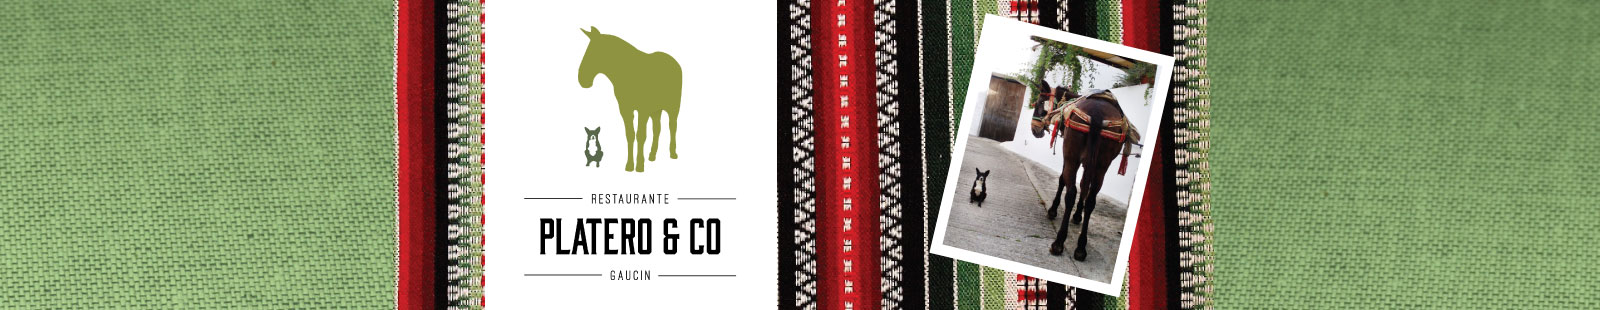 platero-banner-wide